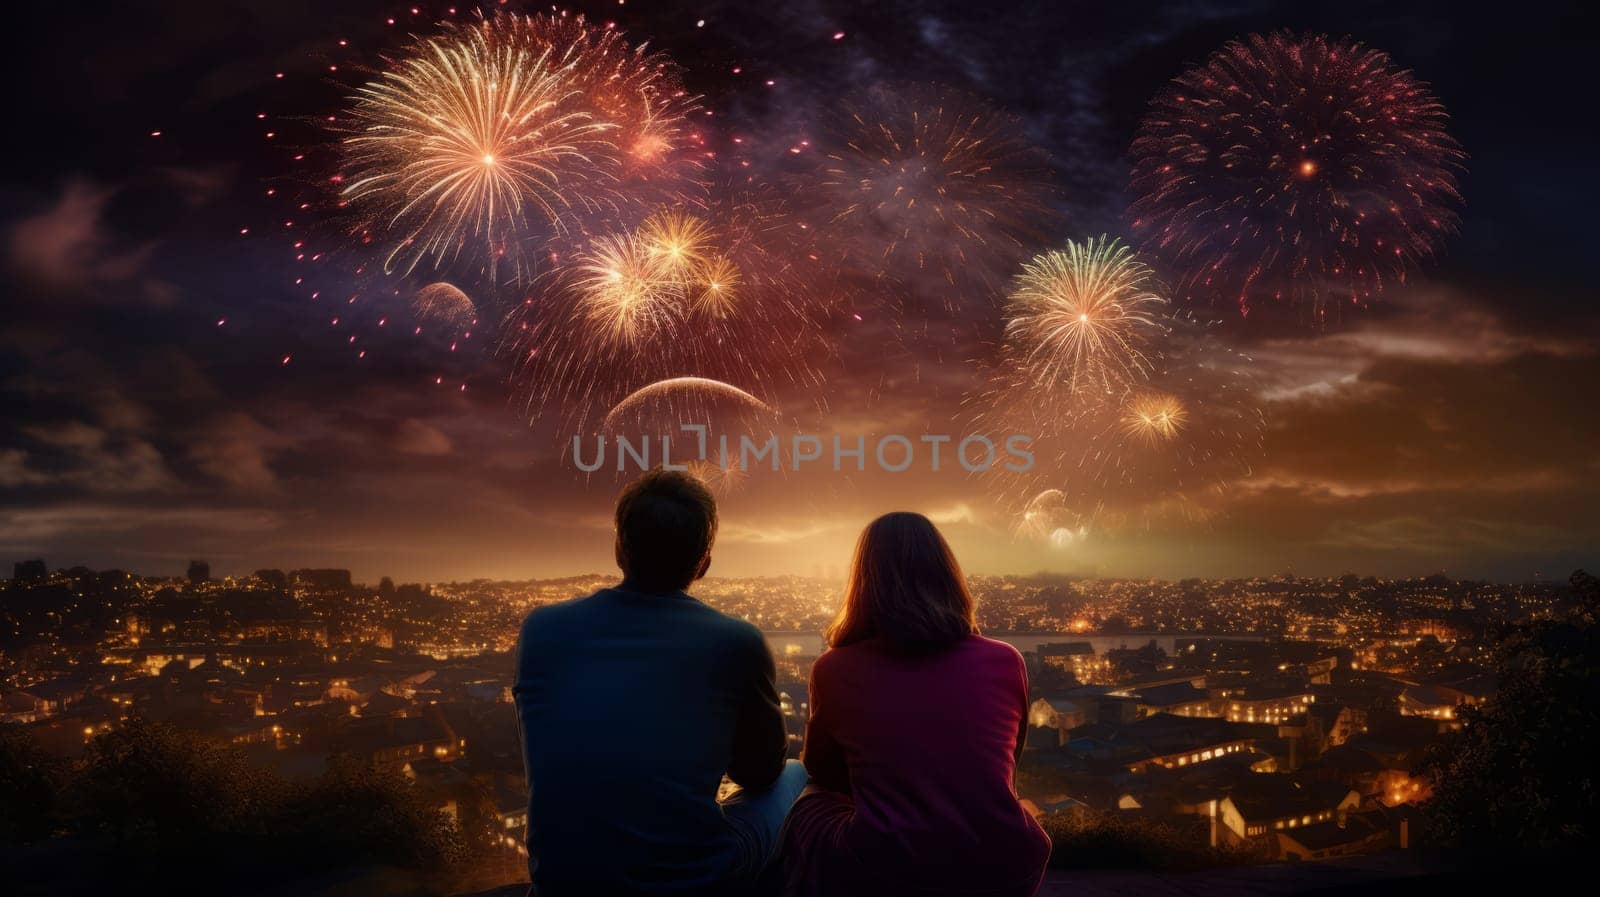 A romantic night view of a city skyline with colorful fireworks. A couple enjoys the spectacular show from a hill. by DogDrawHand